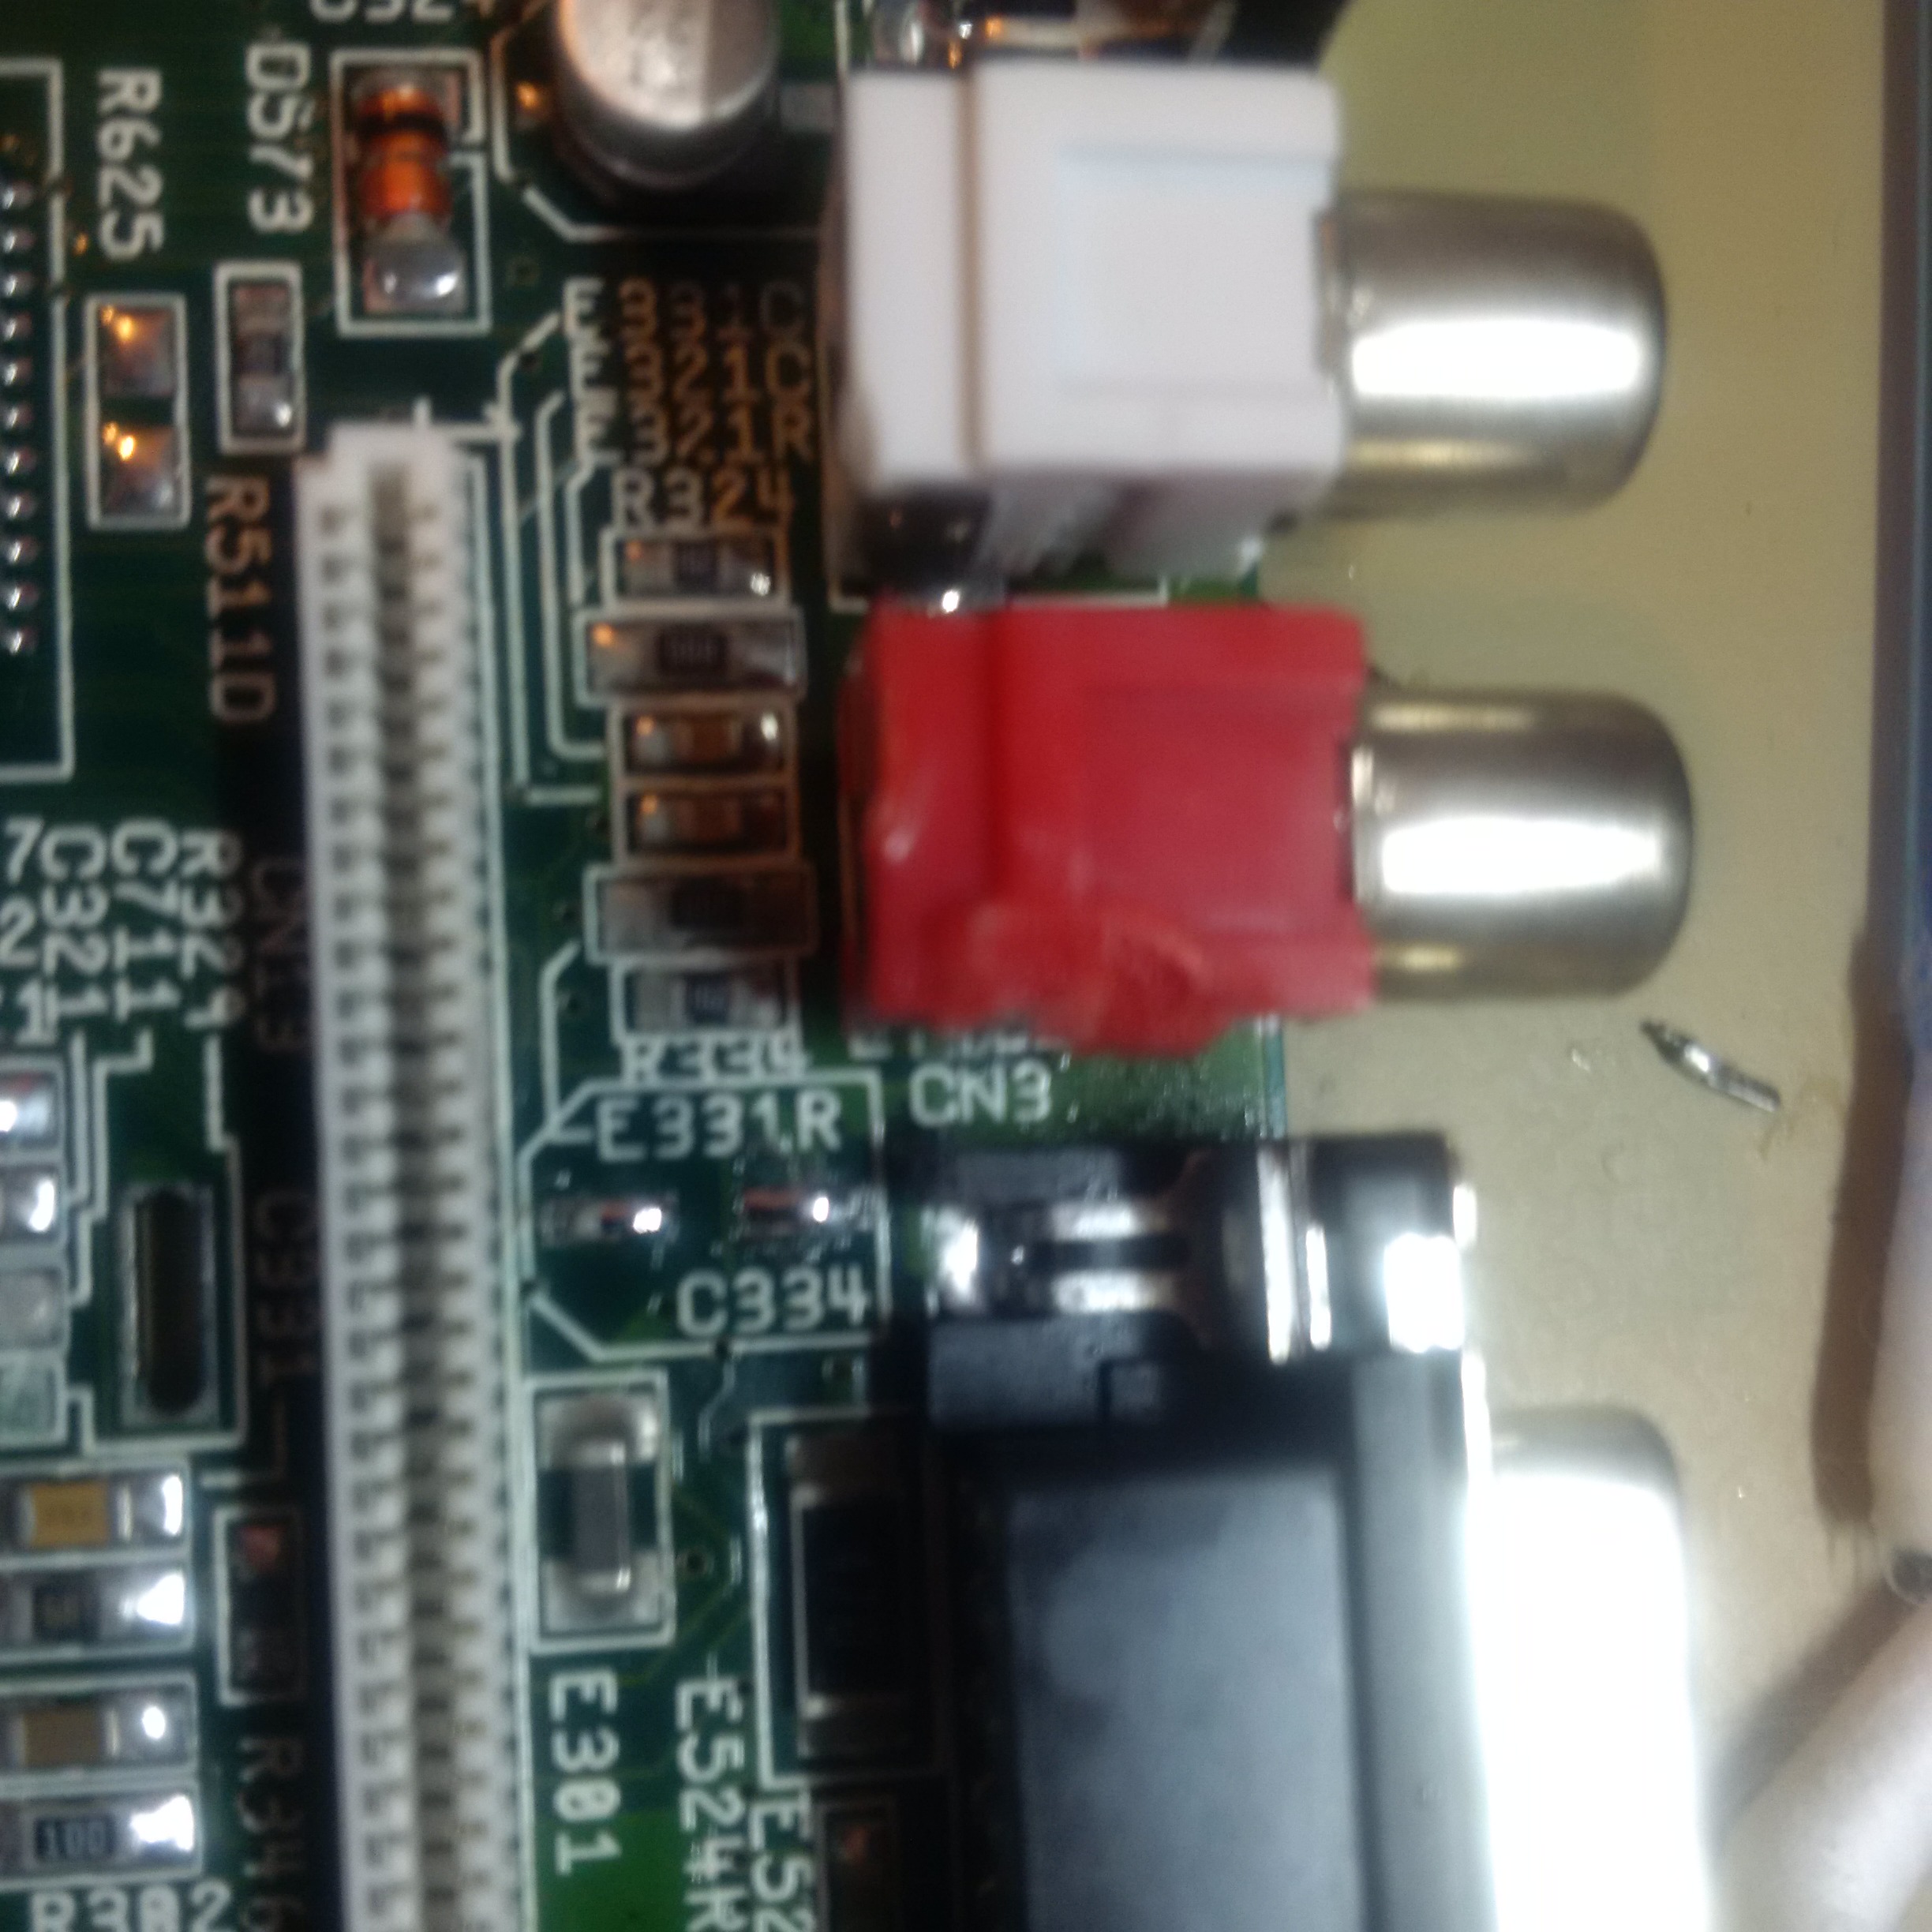 Keyboard connector with capacitor removed